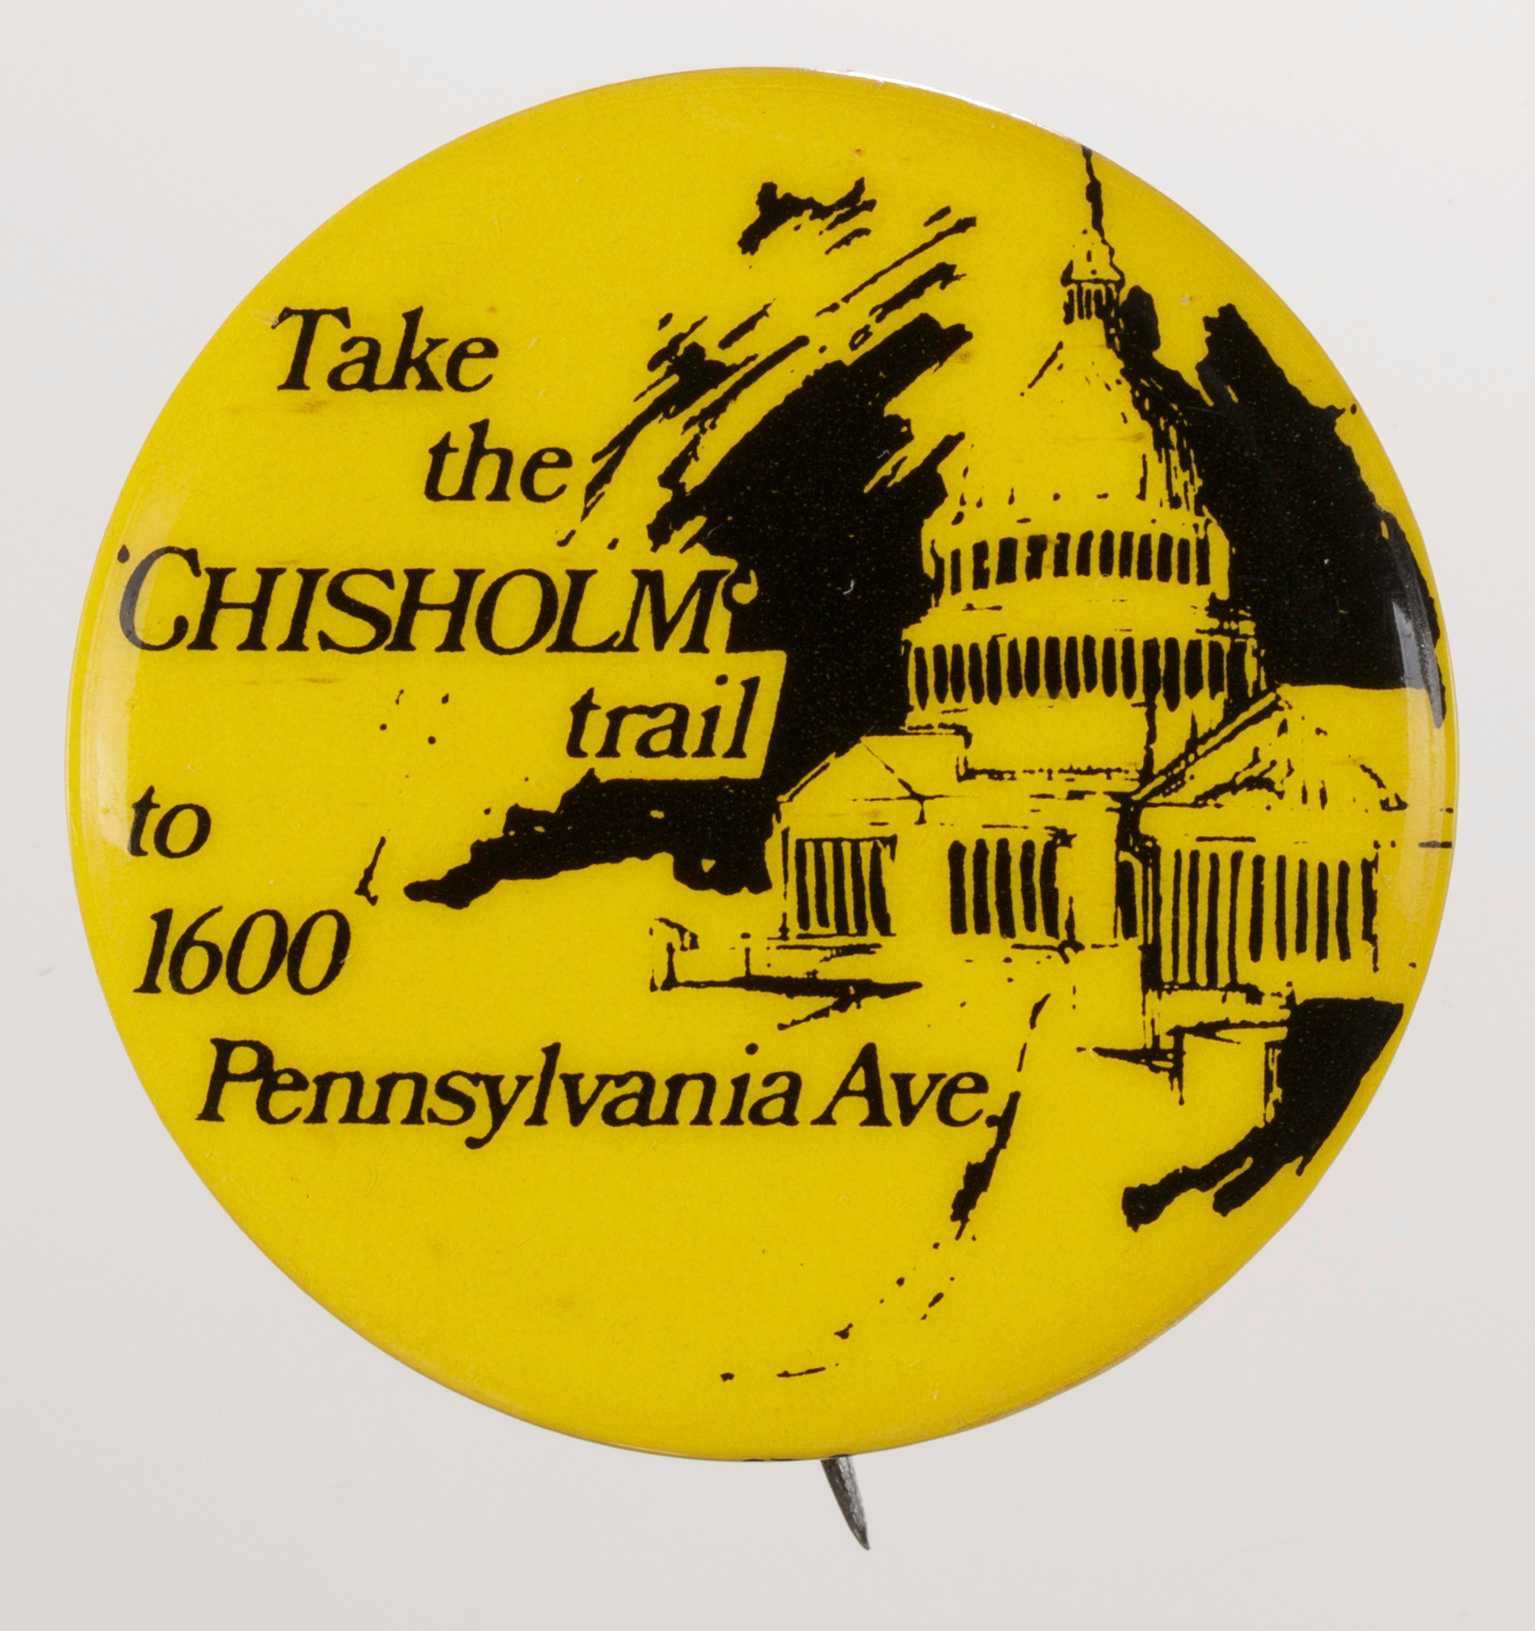 A circular metal pin-back button. The button has a yellow background with black type, aligned to the left, which reads: [Take / the / CHISHOLM / trail / to / 1600 / Pennsylvania Ave.] A depiction of the Capitol building, outlined in black, is aligned to the right of the text. The edge has a logo in black print with the number [40] to one side. The back of the button rusted and has a single pin without a clasp.